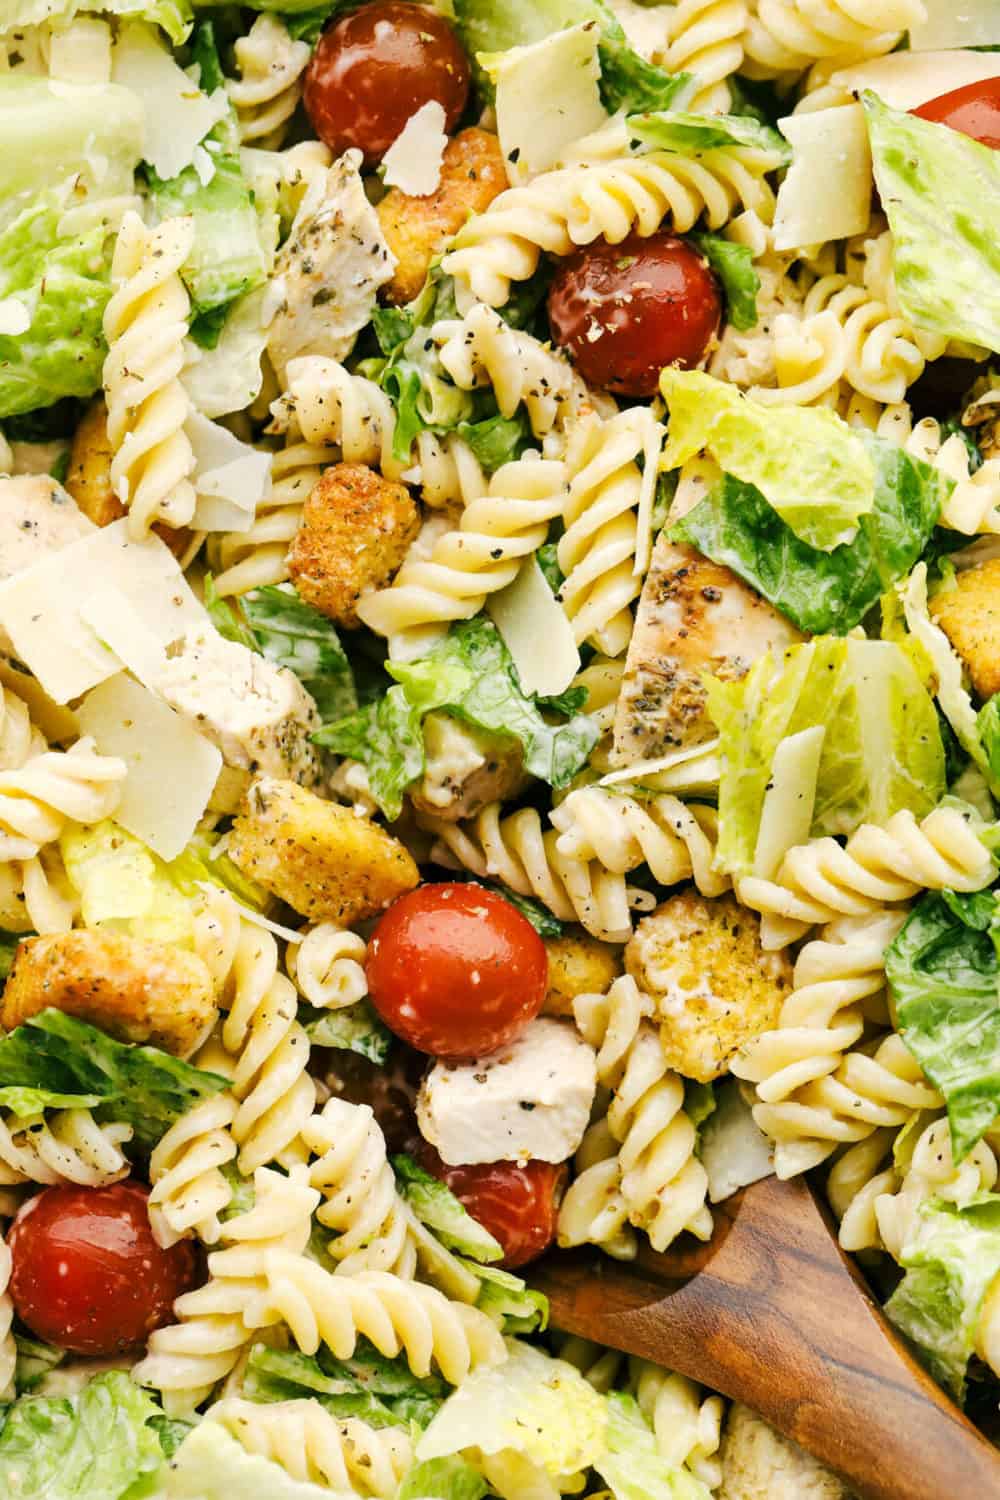 An easy dinner idea: a vibrant Caesar pasta salad with fusilli pasta, chicken, cherry tomatoes, romaine lettuce, croutons, and shaved parmesan, garnished with Caesar dressing.